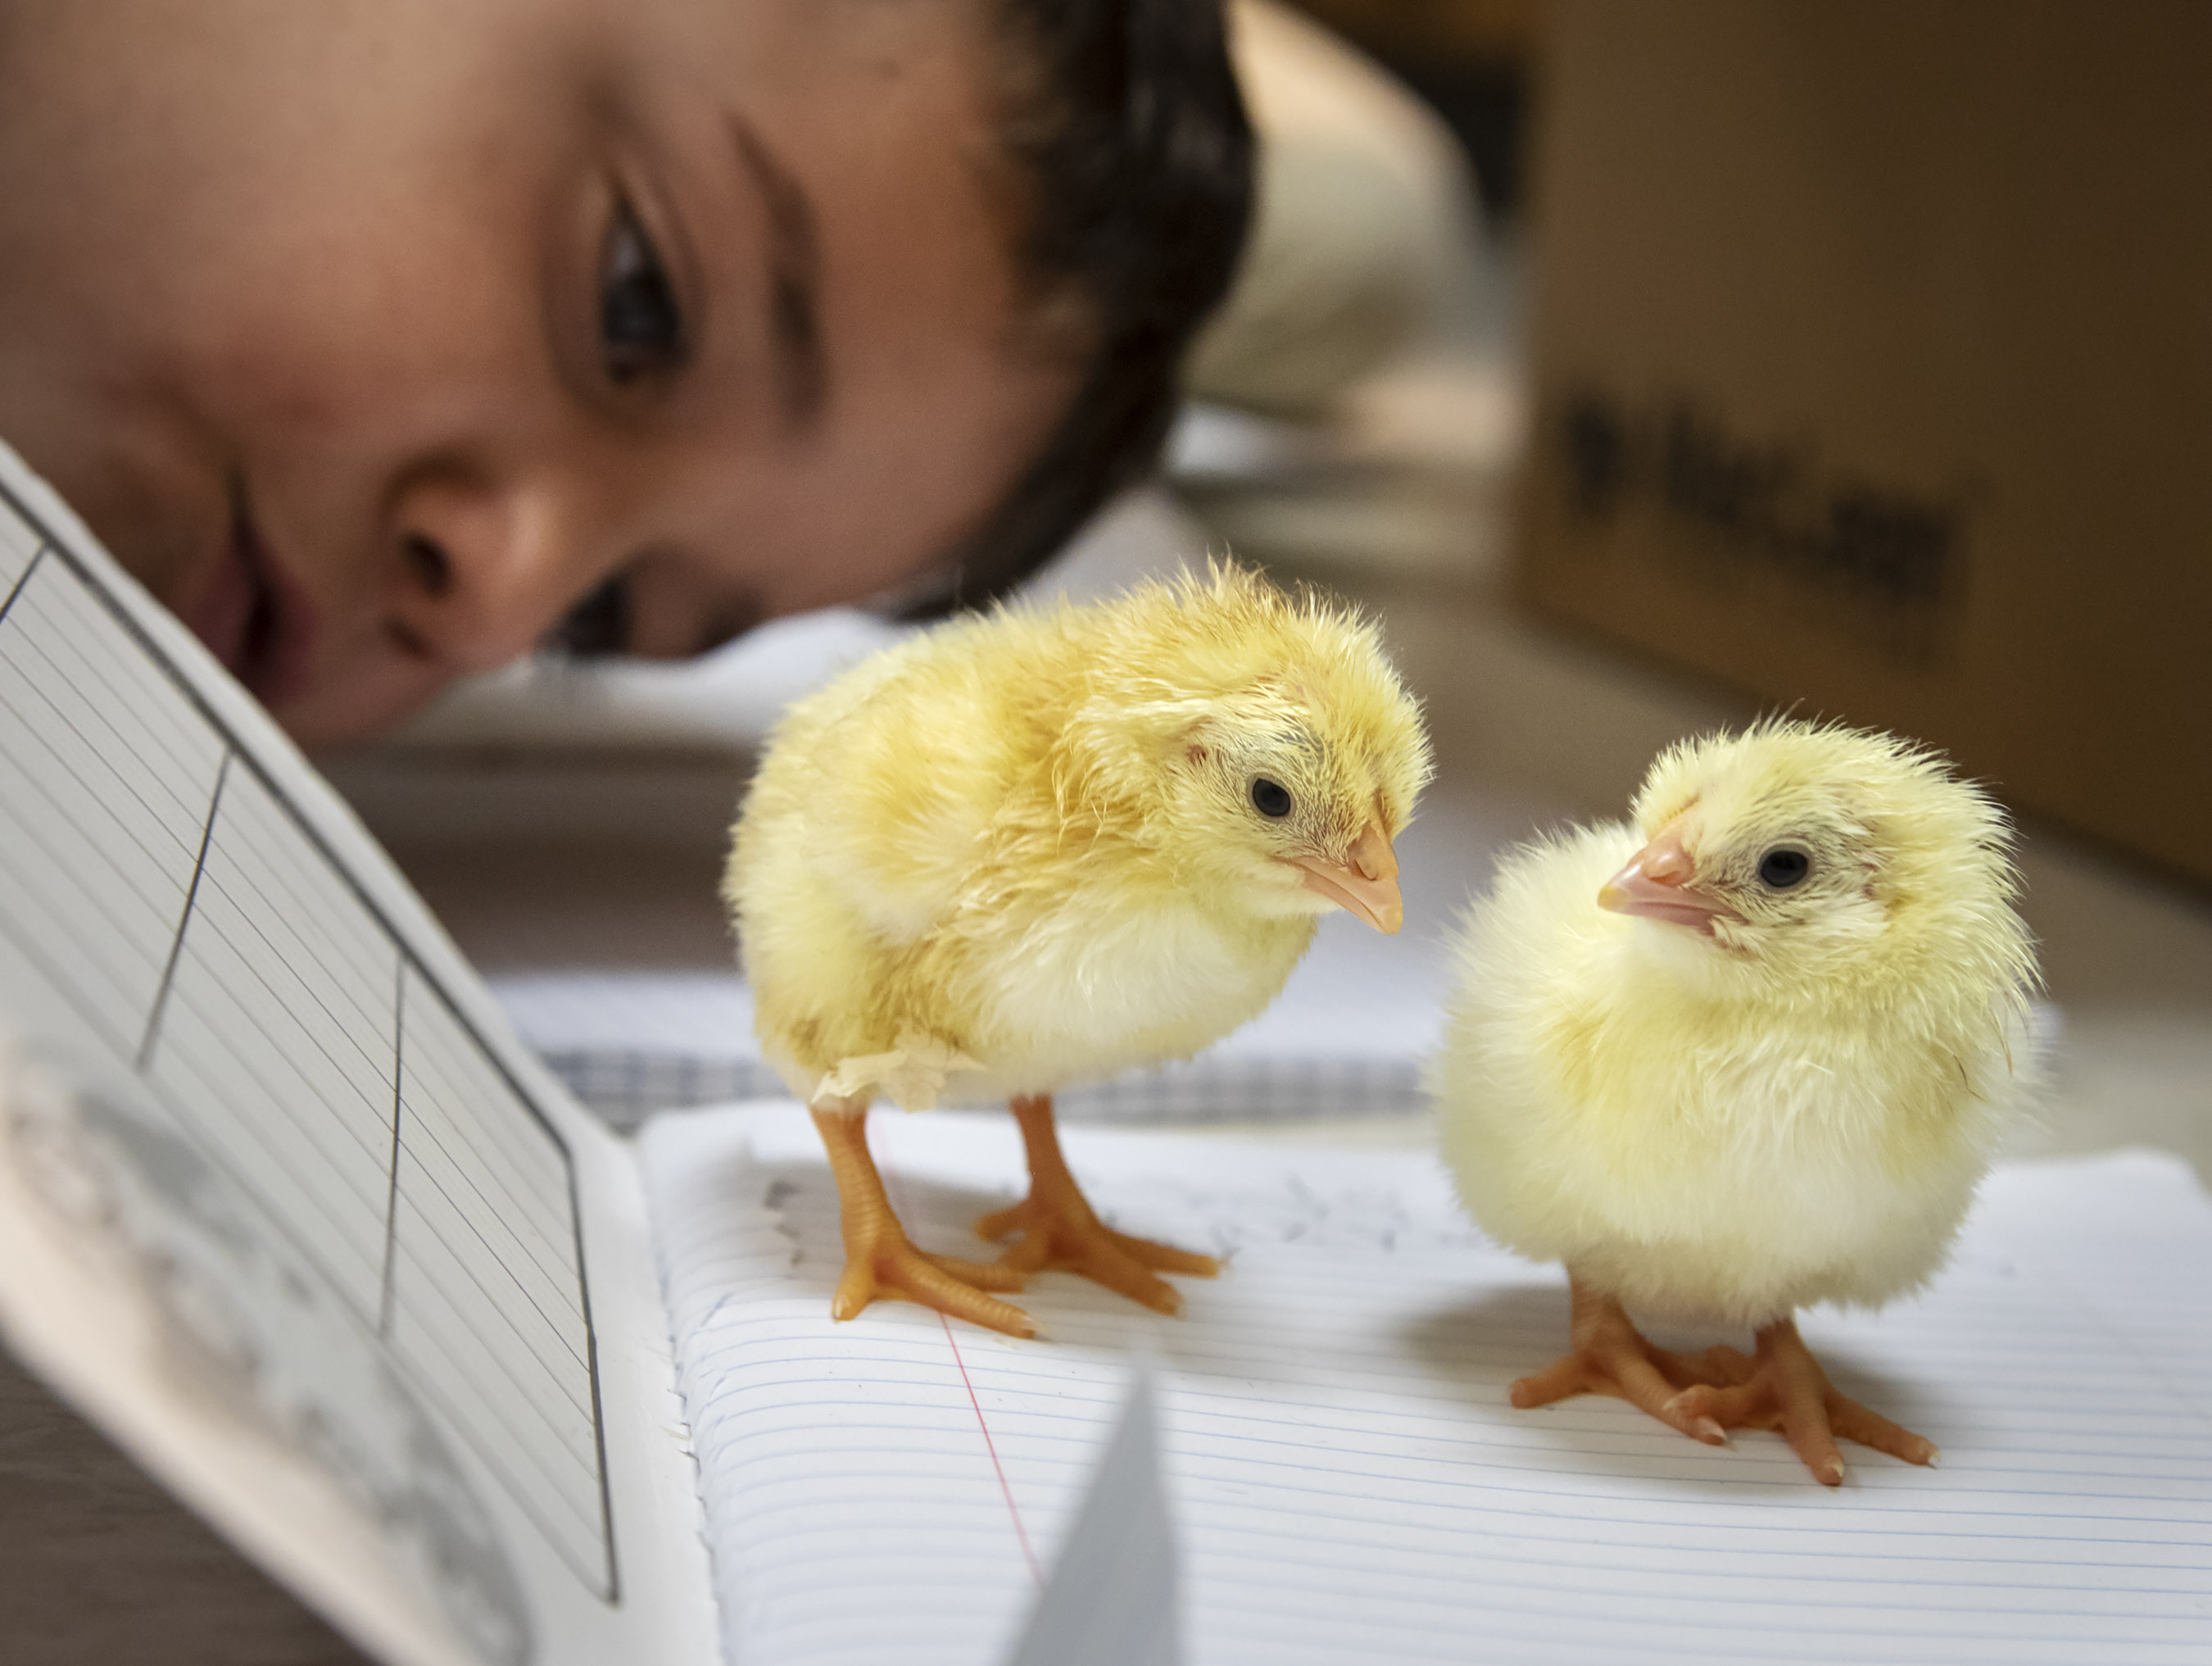 Photo by Ken Martin - a boy observes chicks as part of his 4-H embryology project.